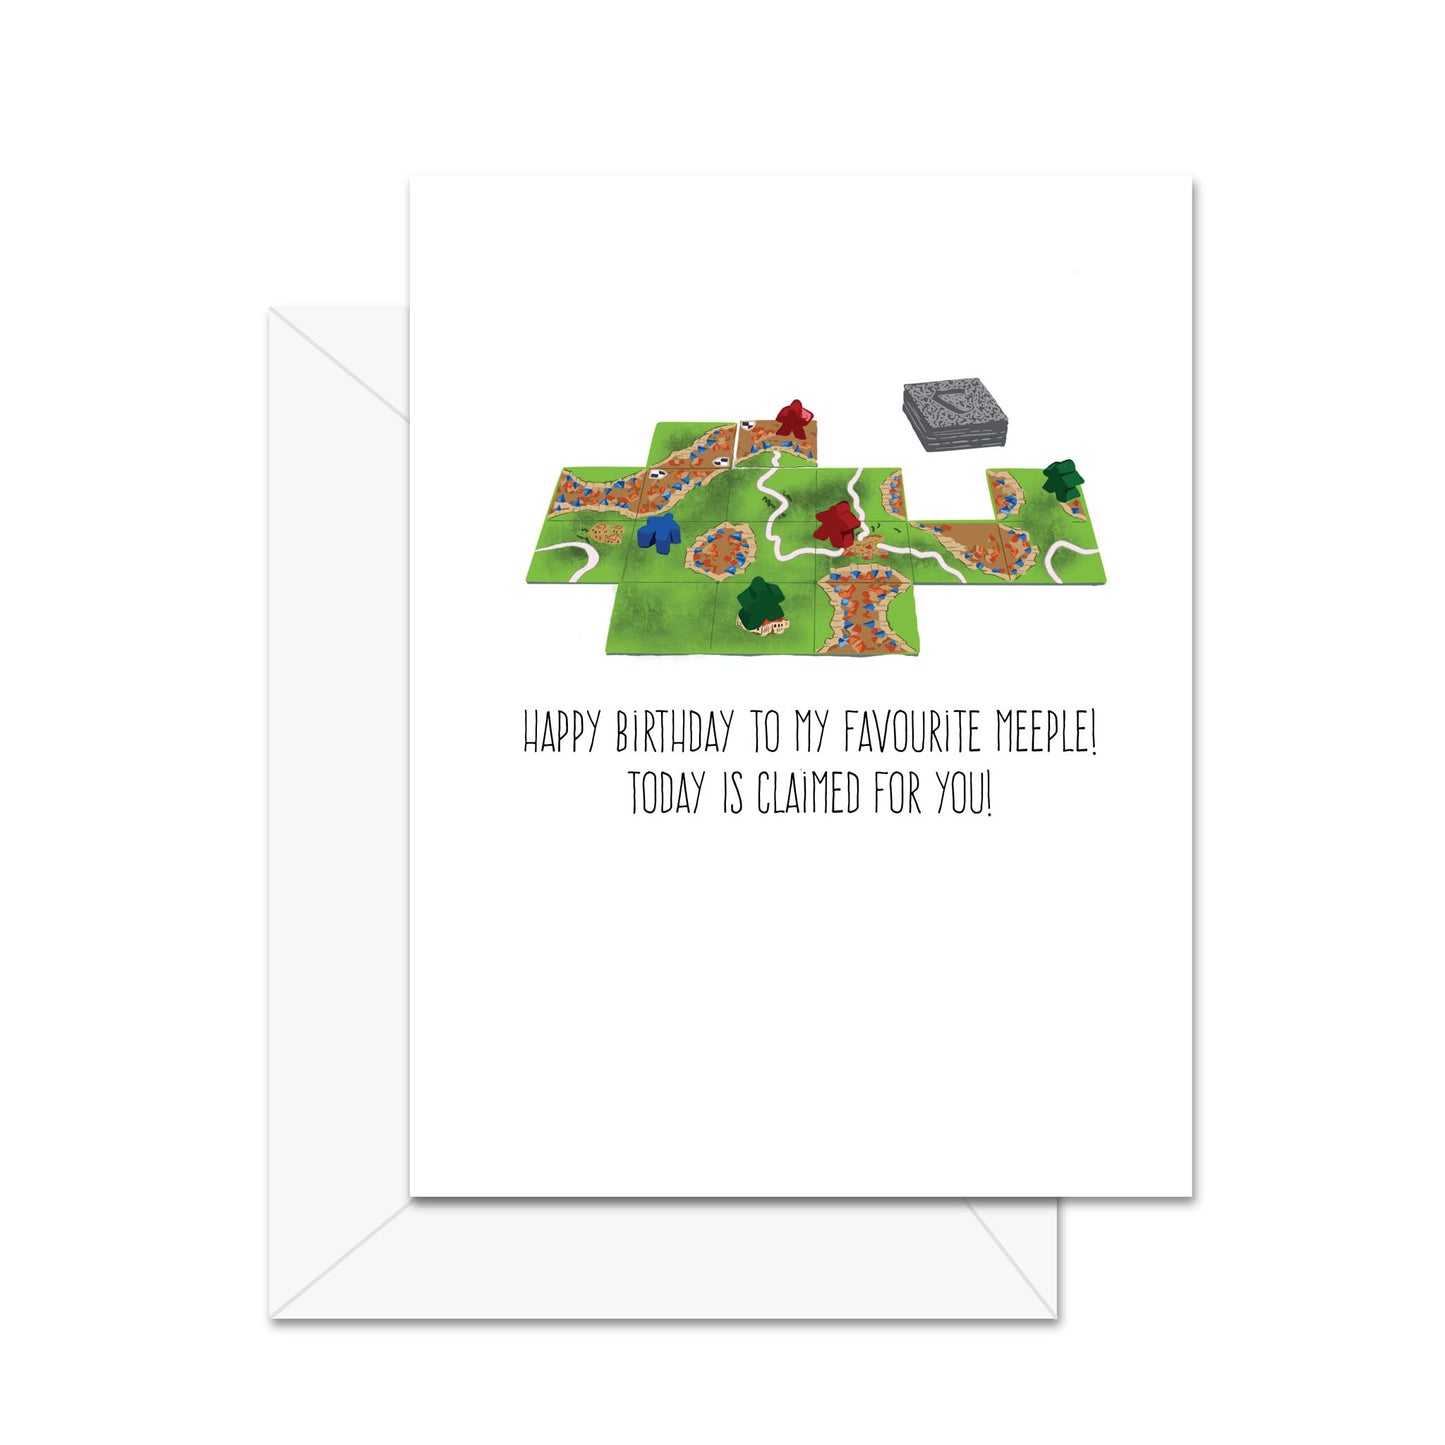 Happy Birthday To My Favourite Meeple! Today Is Claimed For You!- Greeting Card